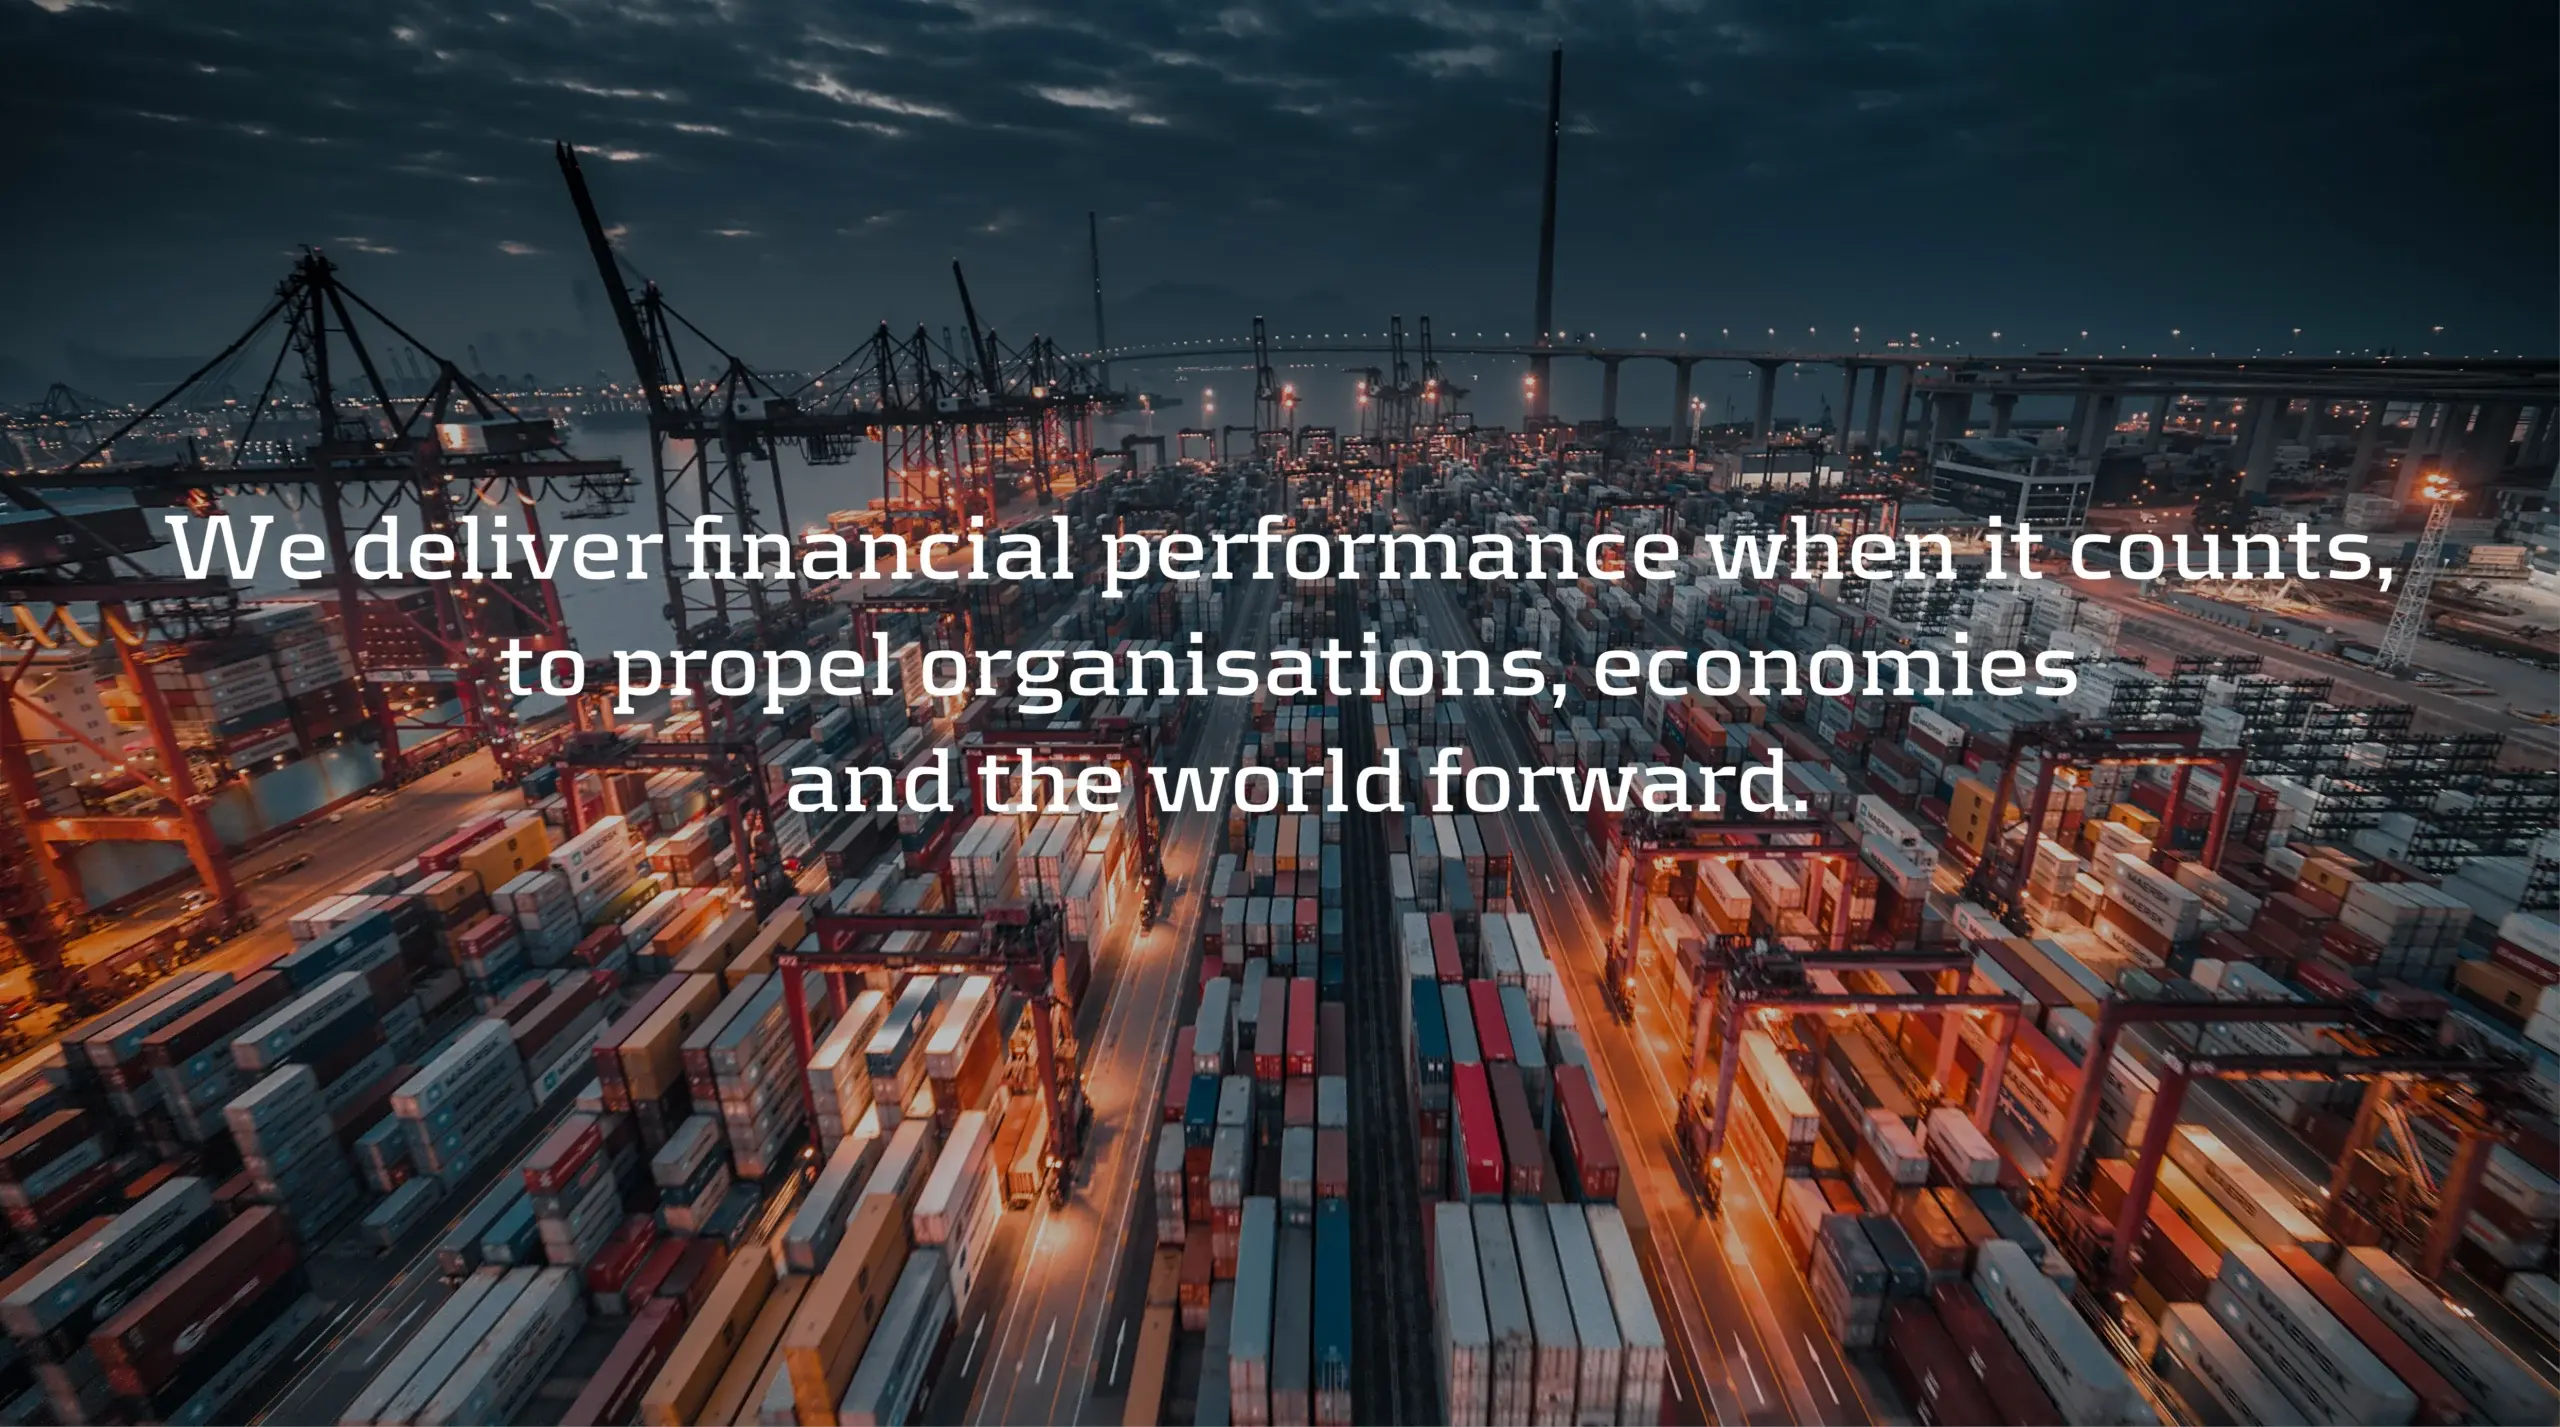 We deliver financial performance when it counts to propel organisations, economies and the world forward